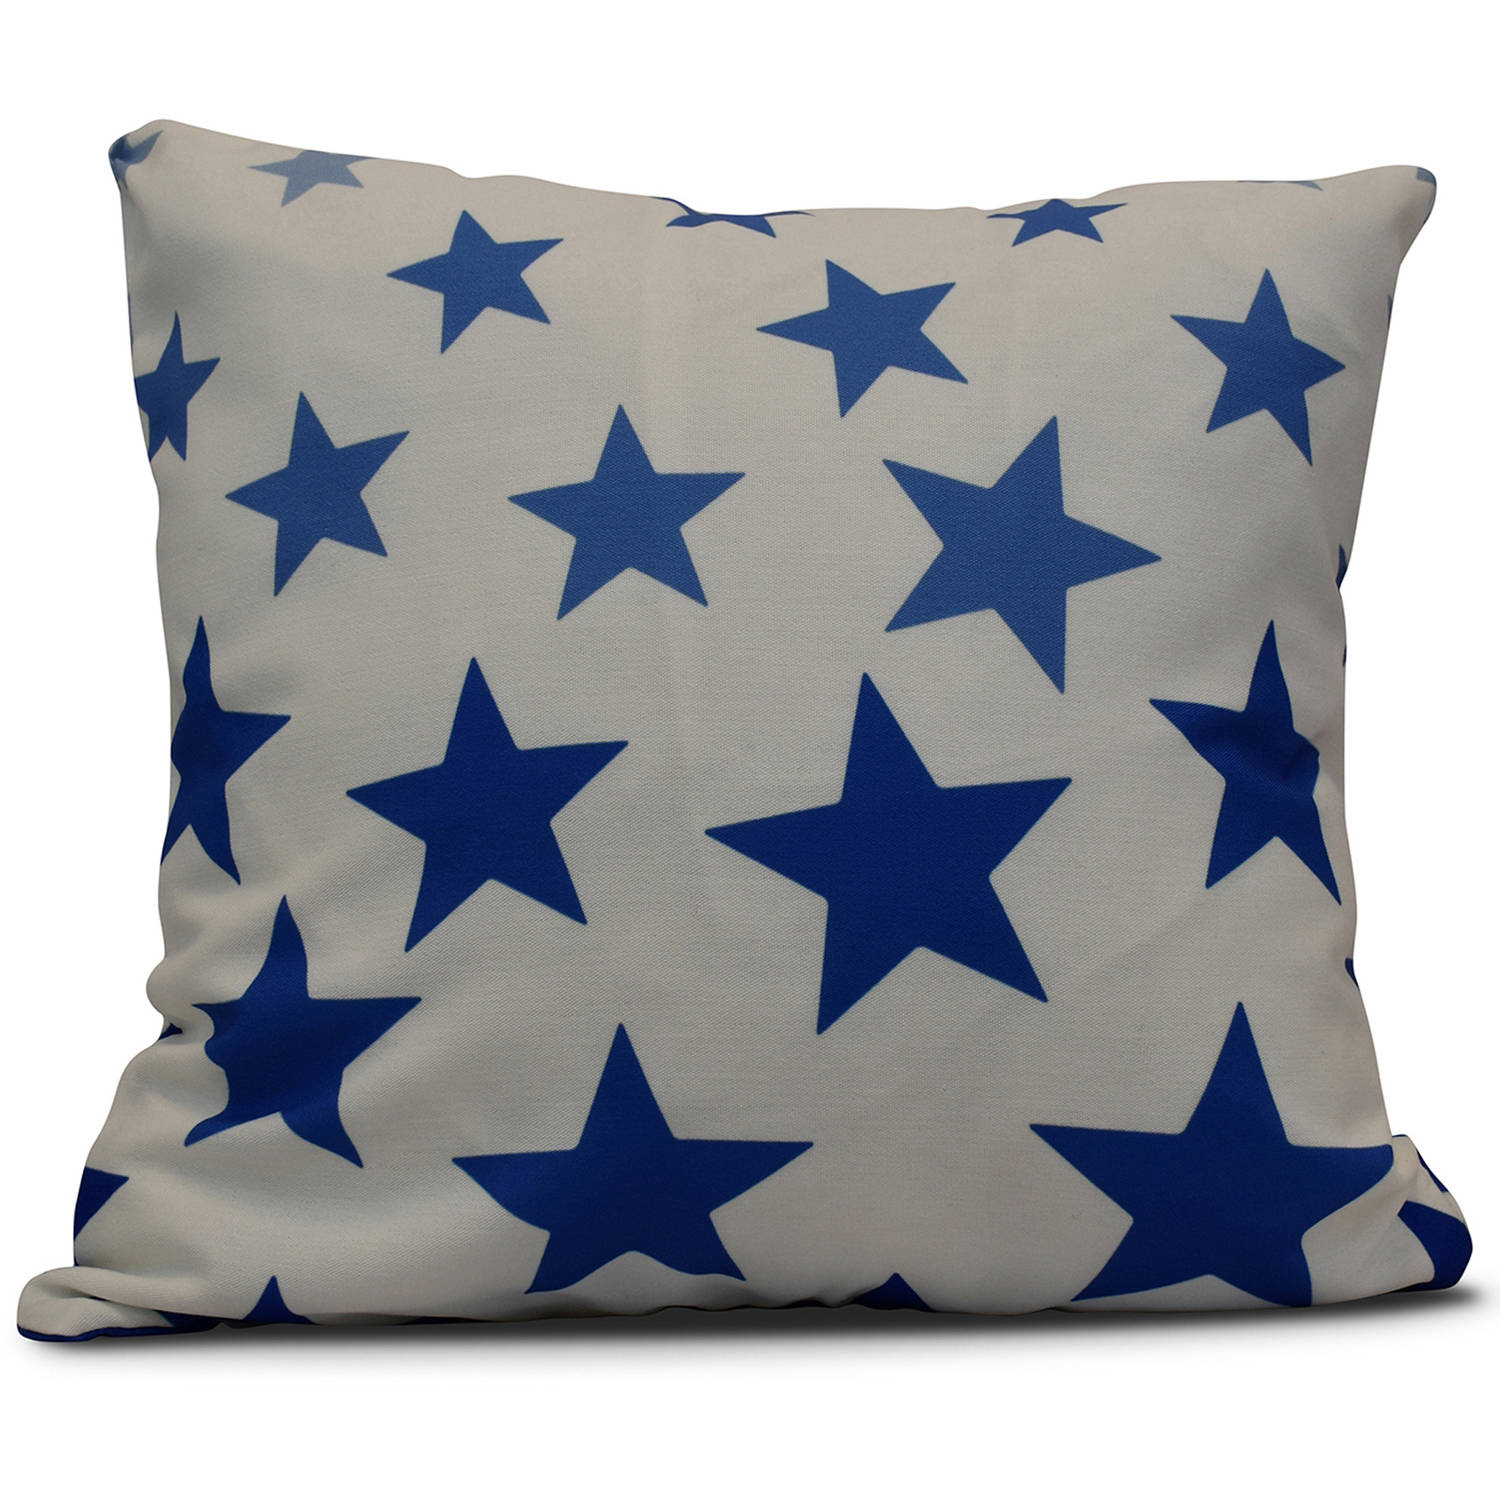 Simply Daisy Just Stars Geometric Print Outdoor Pillow - image 1 of 2